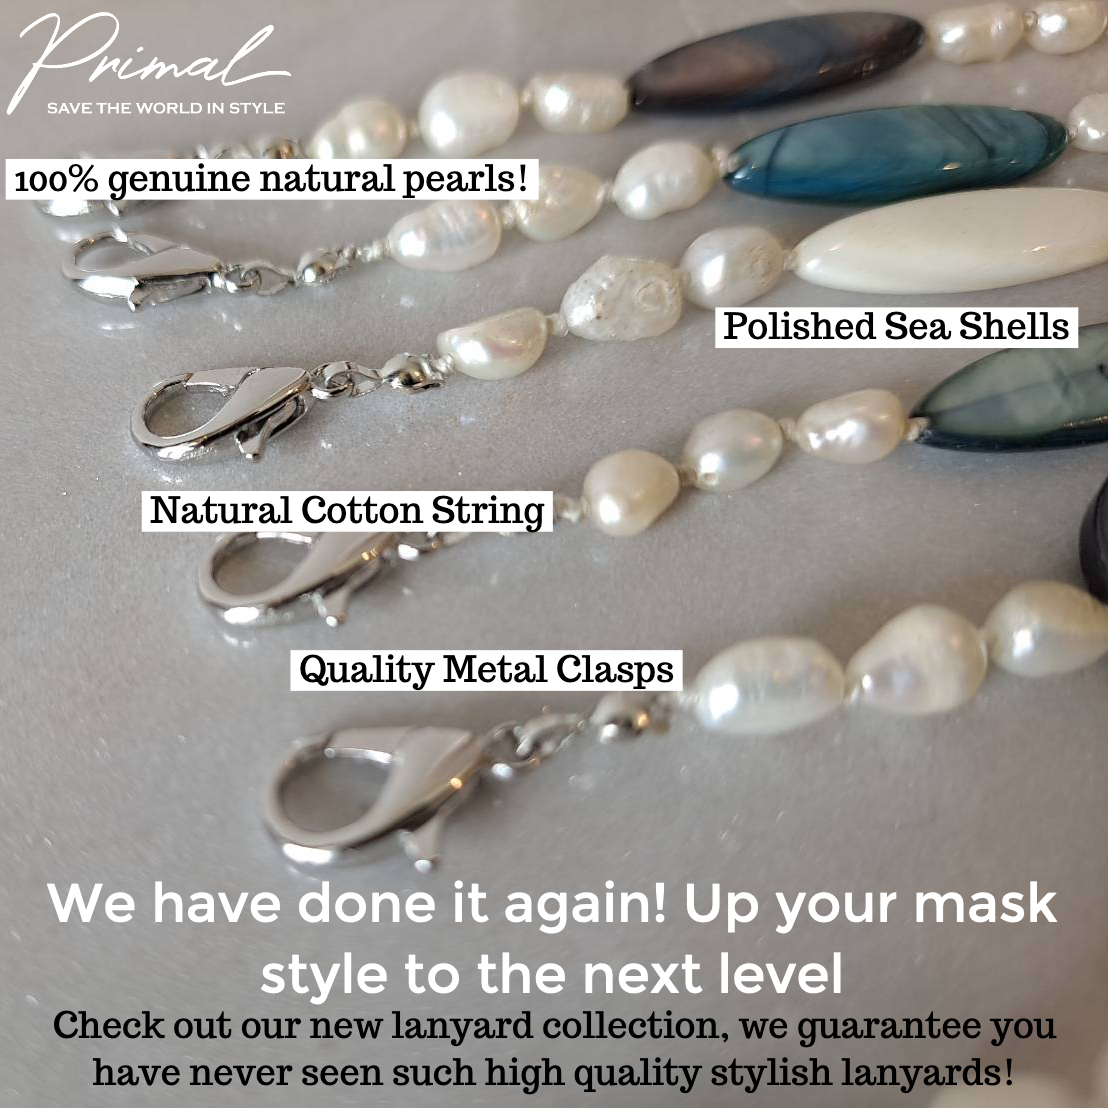 New Product! 100% Genuine Pearl and Sea Shell Lanyards.